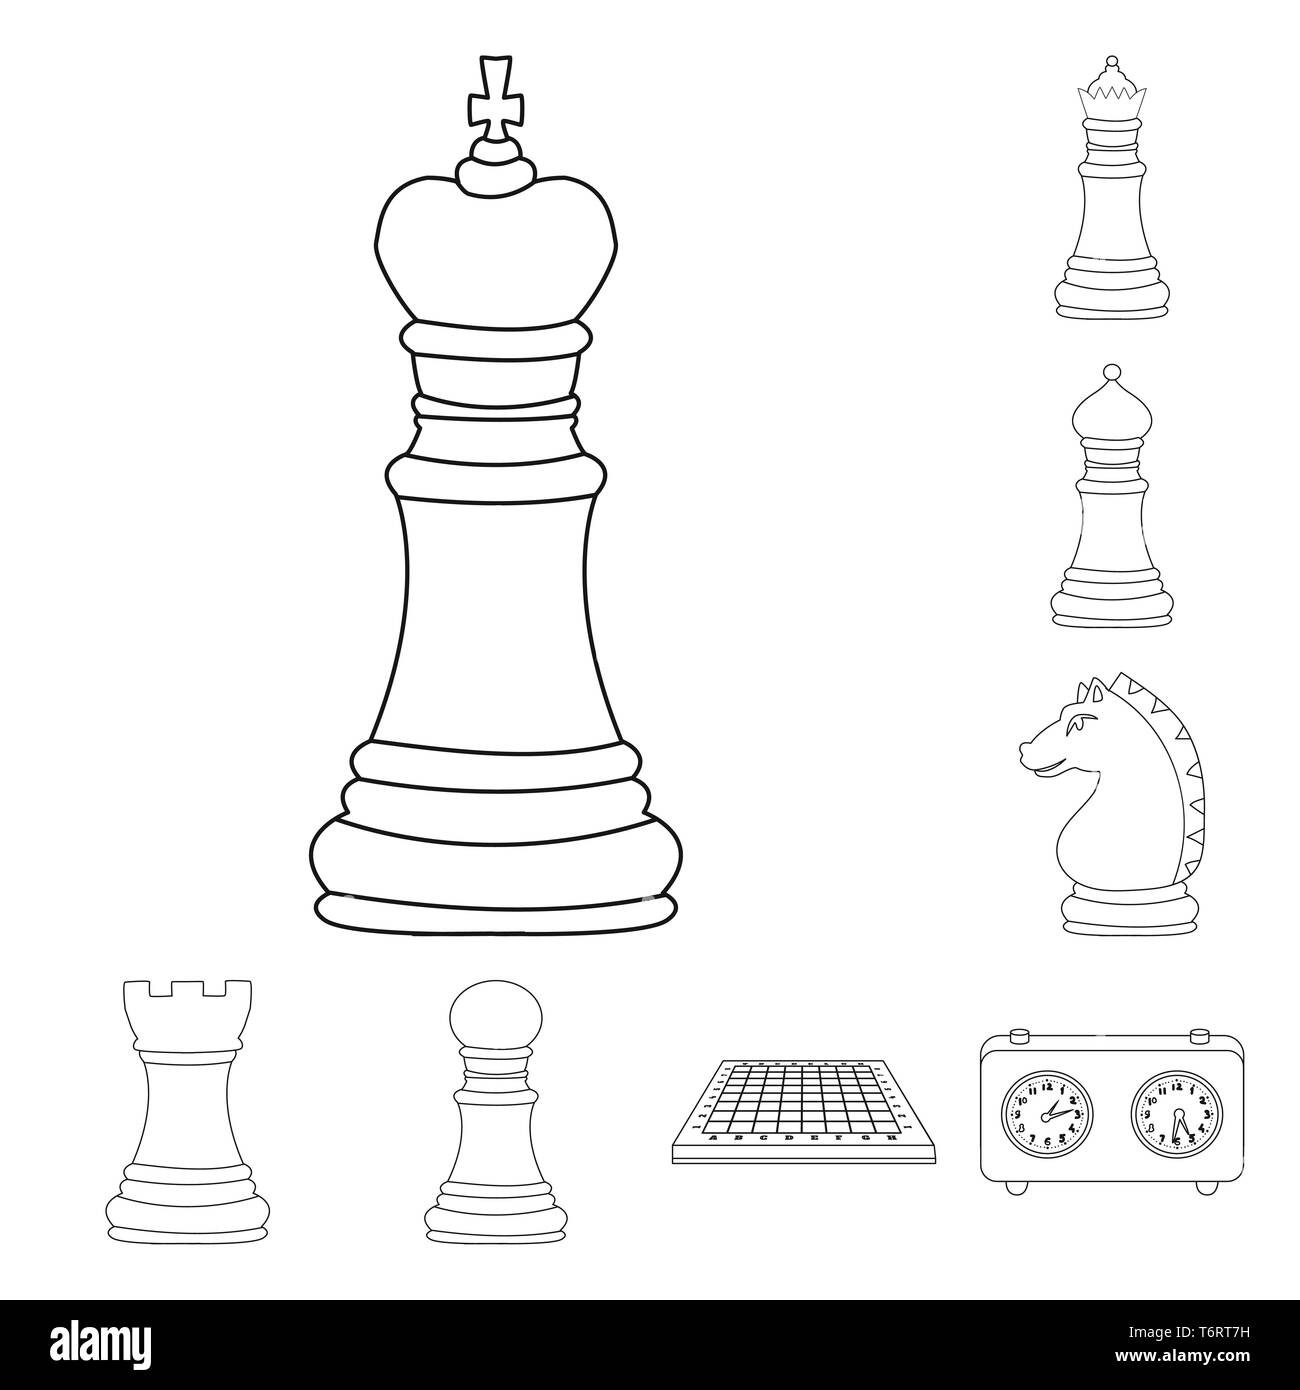 FREE! - Pawn Chess Piece Colouring